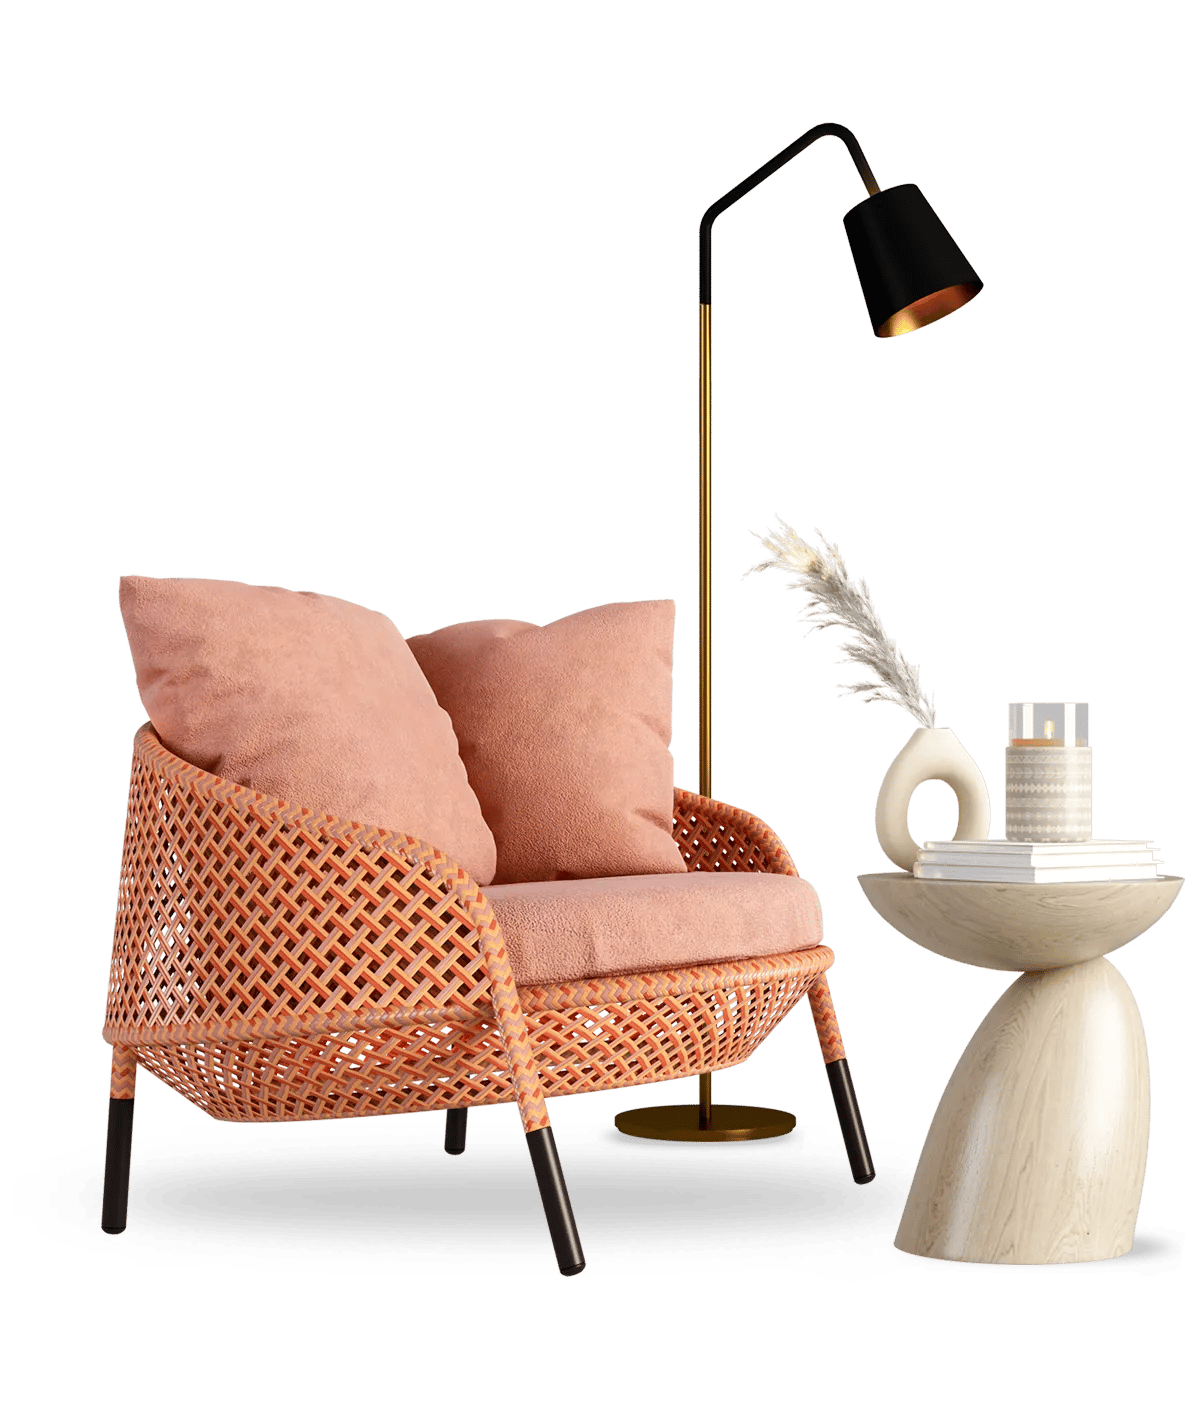 furniture photo editing services